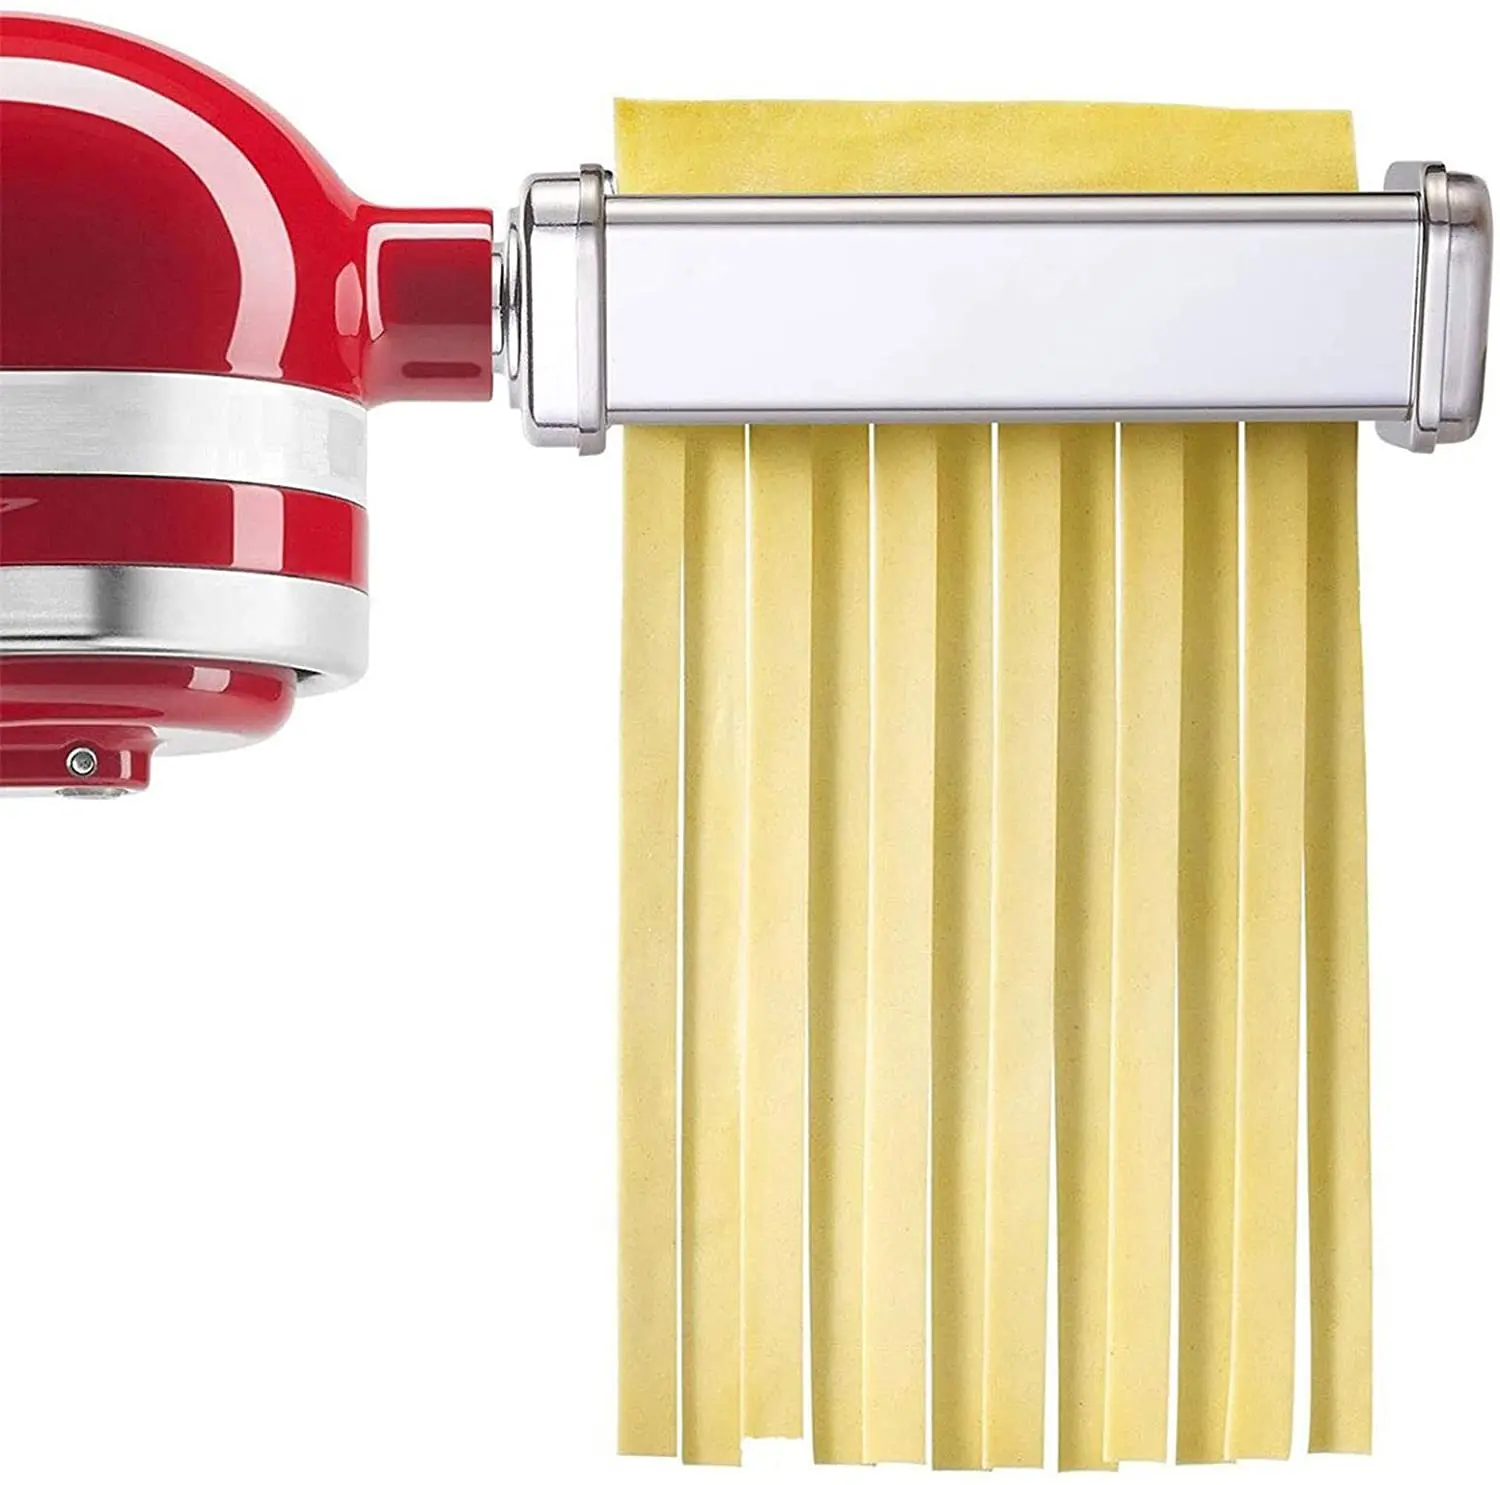 Pasta Attachment for KitchenAid Stand Mixer, Kitchen aid Attachment for Stand  Mixer, 3-1 Pasta Maker Machine Included Pasta Shee - AliExpress